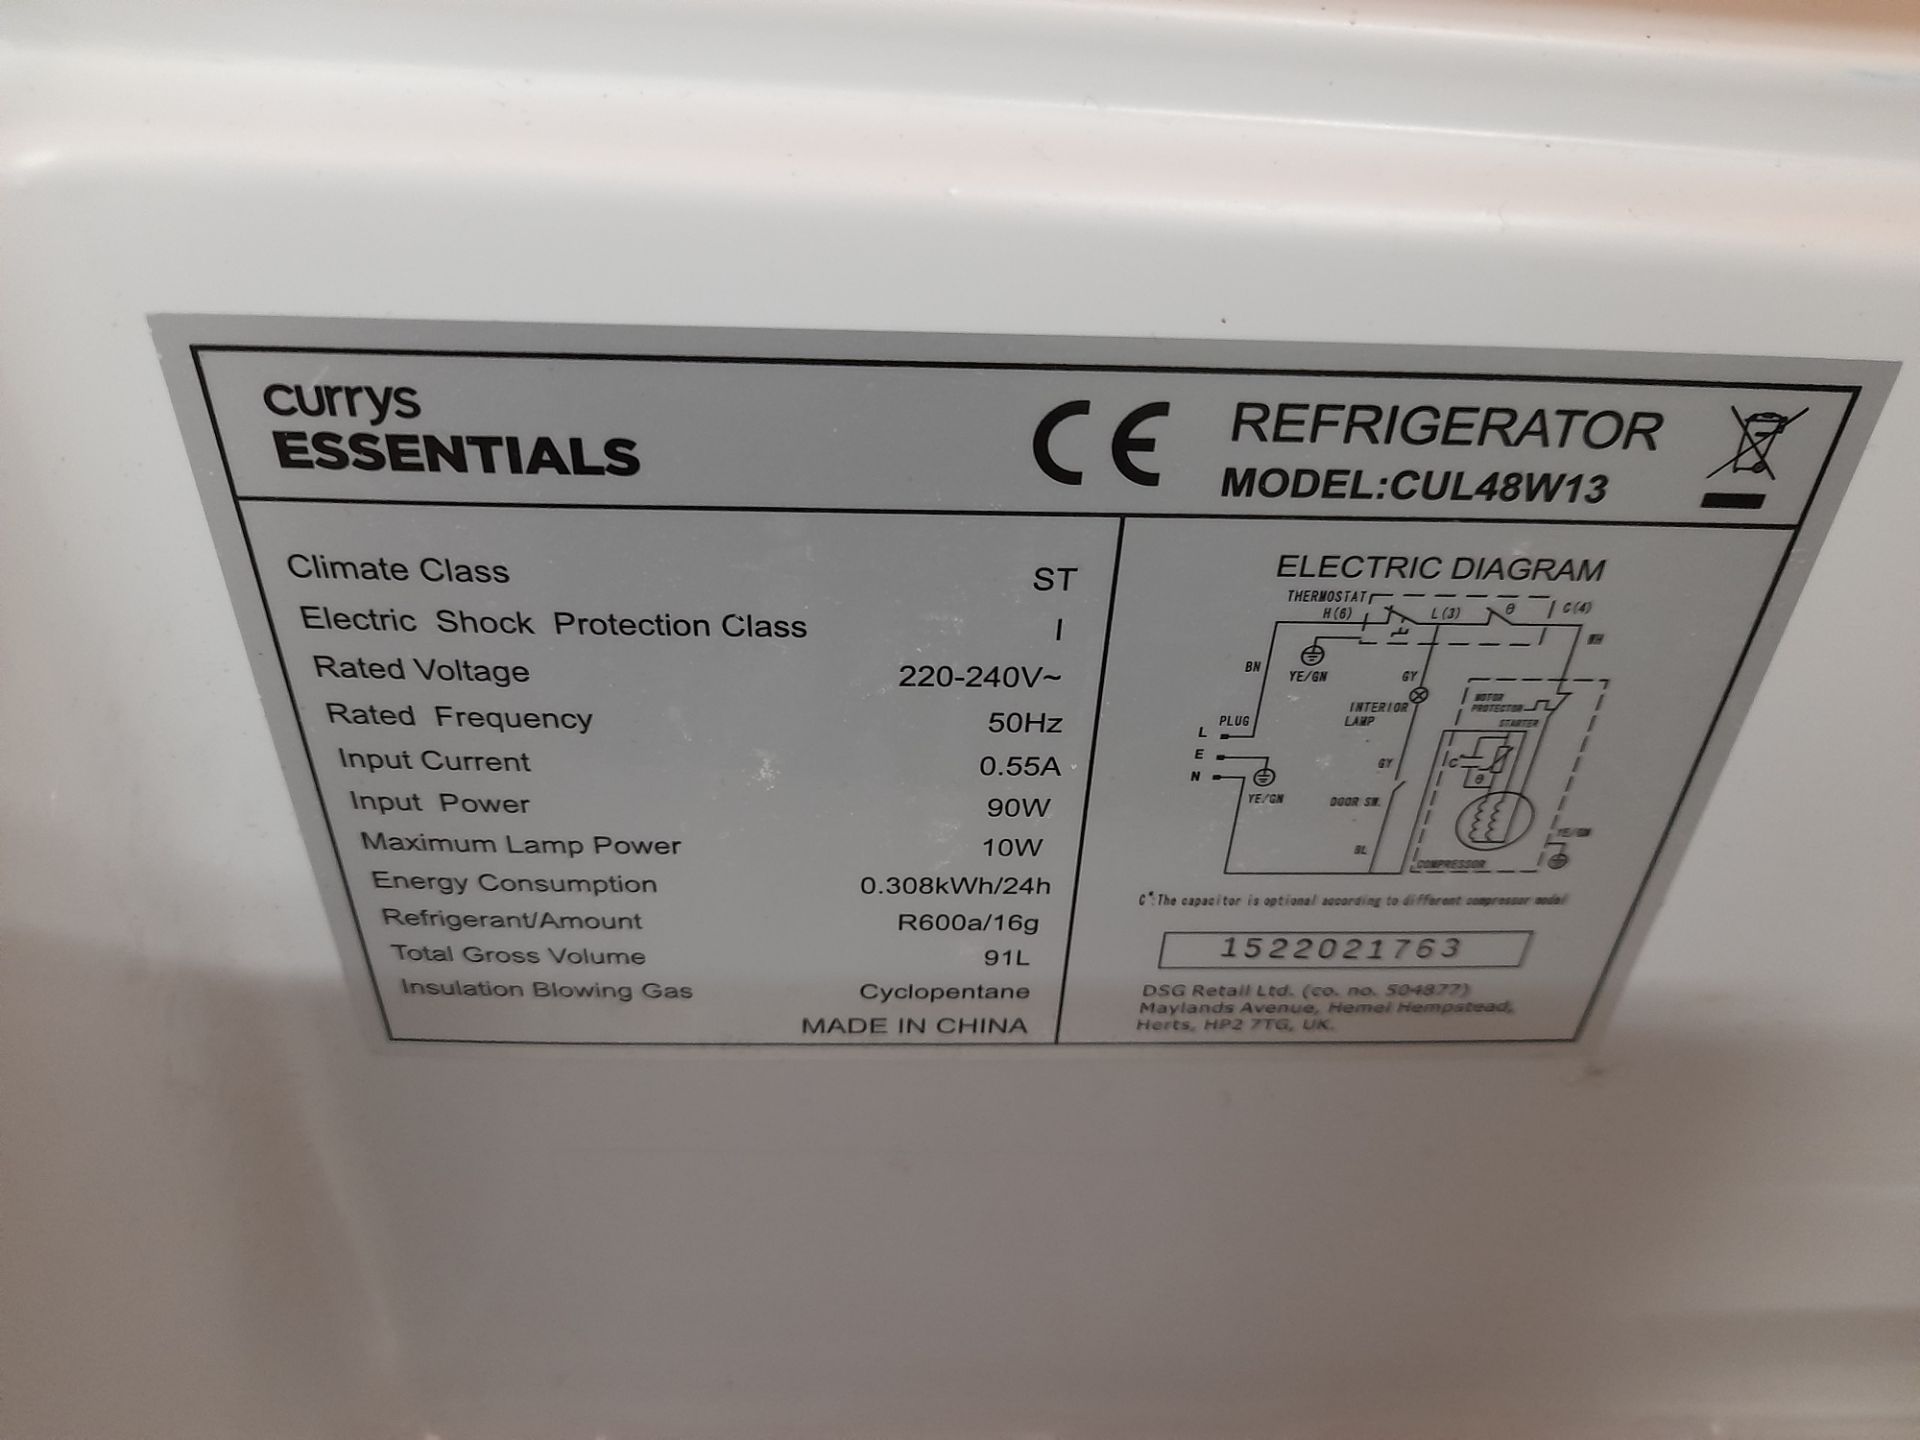 Curry’s Essential CUL48W13 undercounter refrigerator - Image 2 of 2